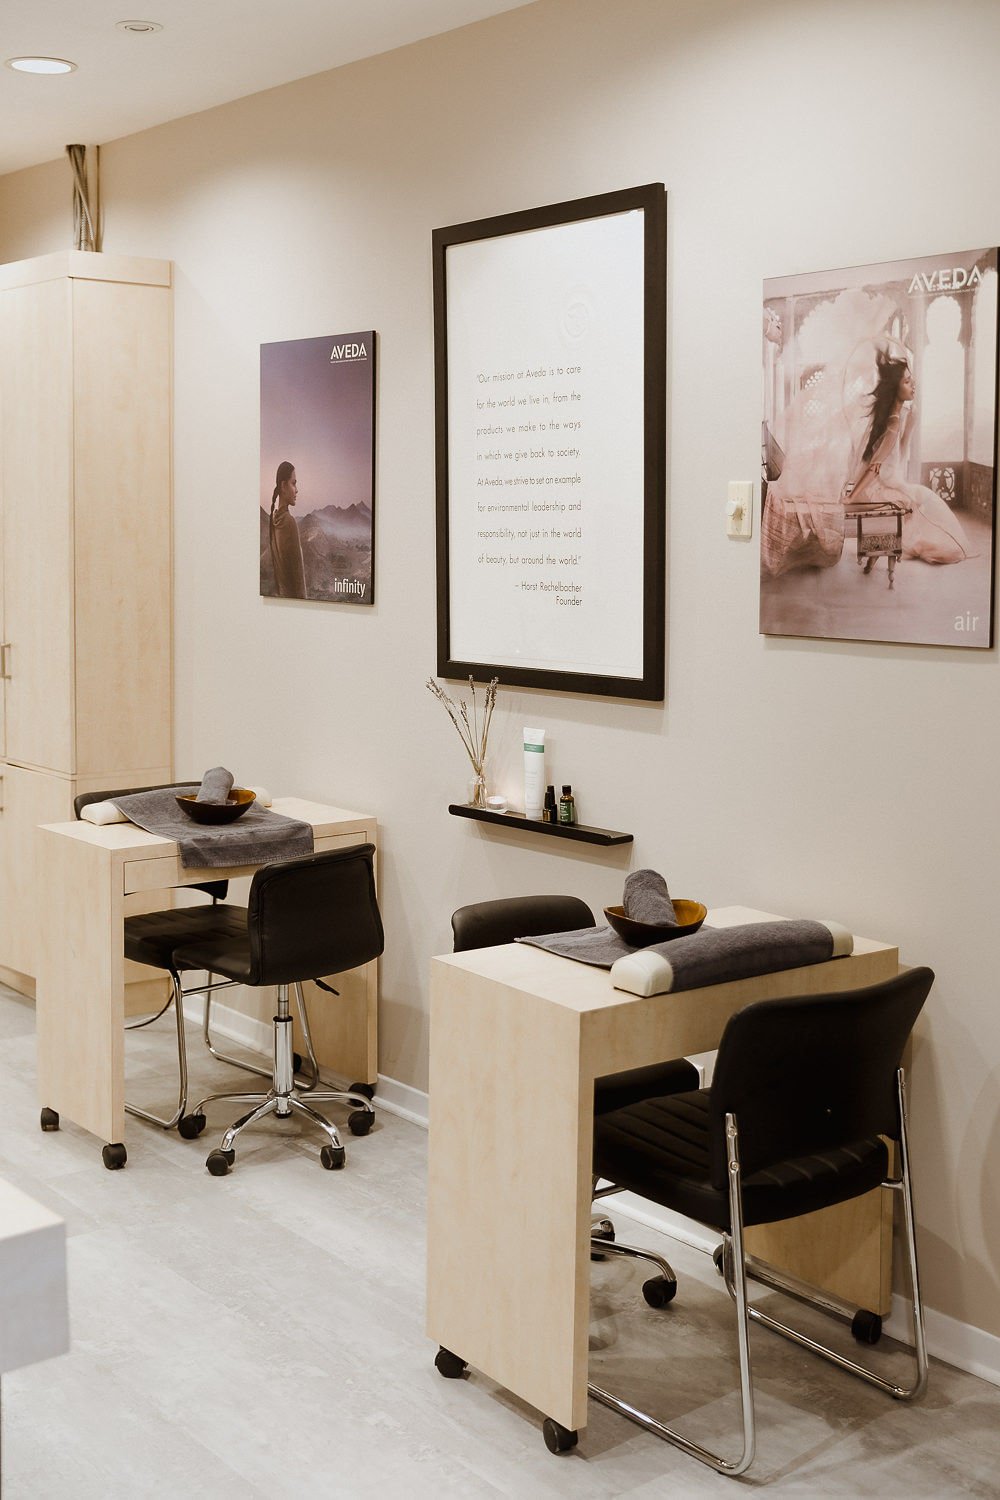 ottawa-manicures-and-pedicures-stations.jpg